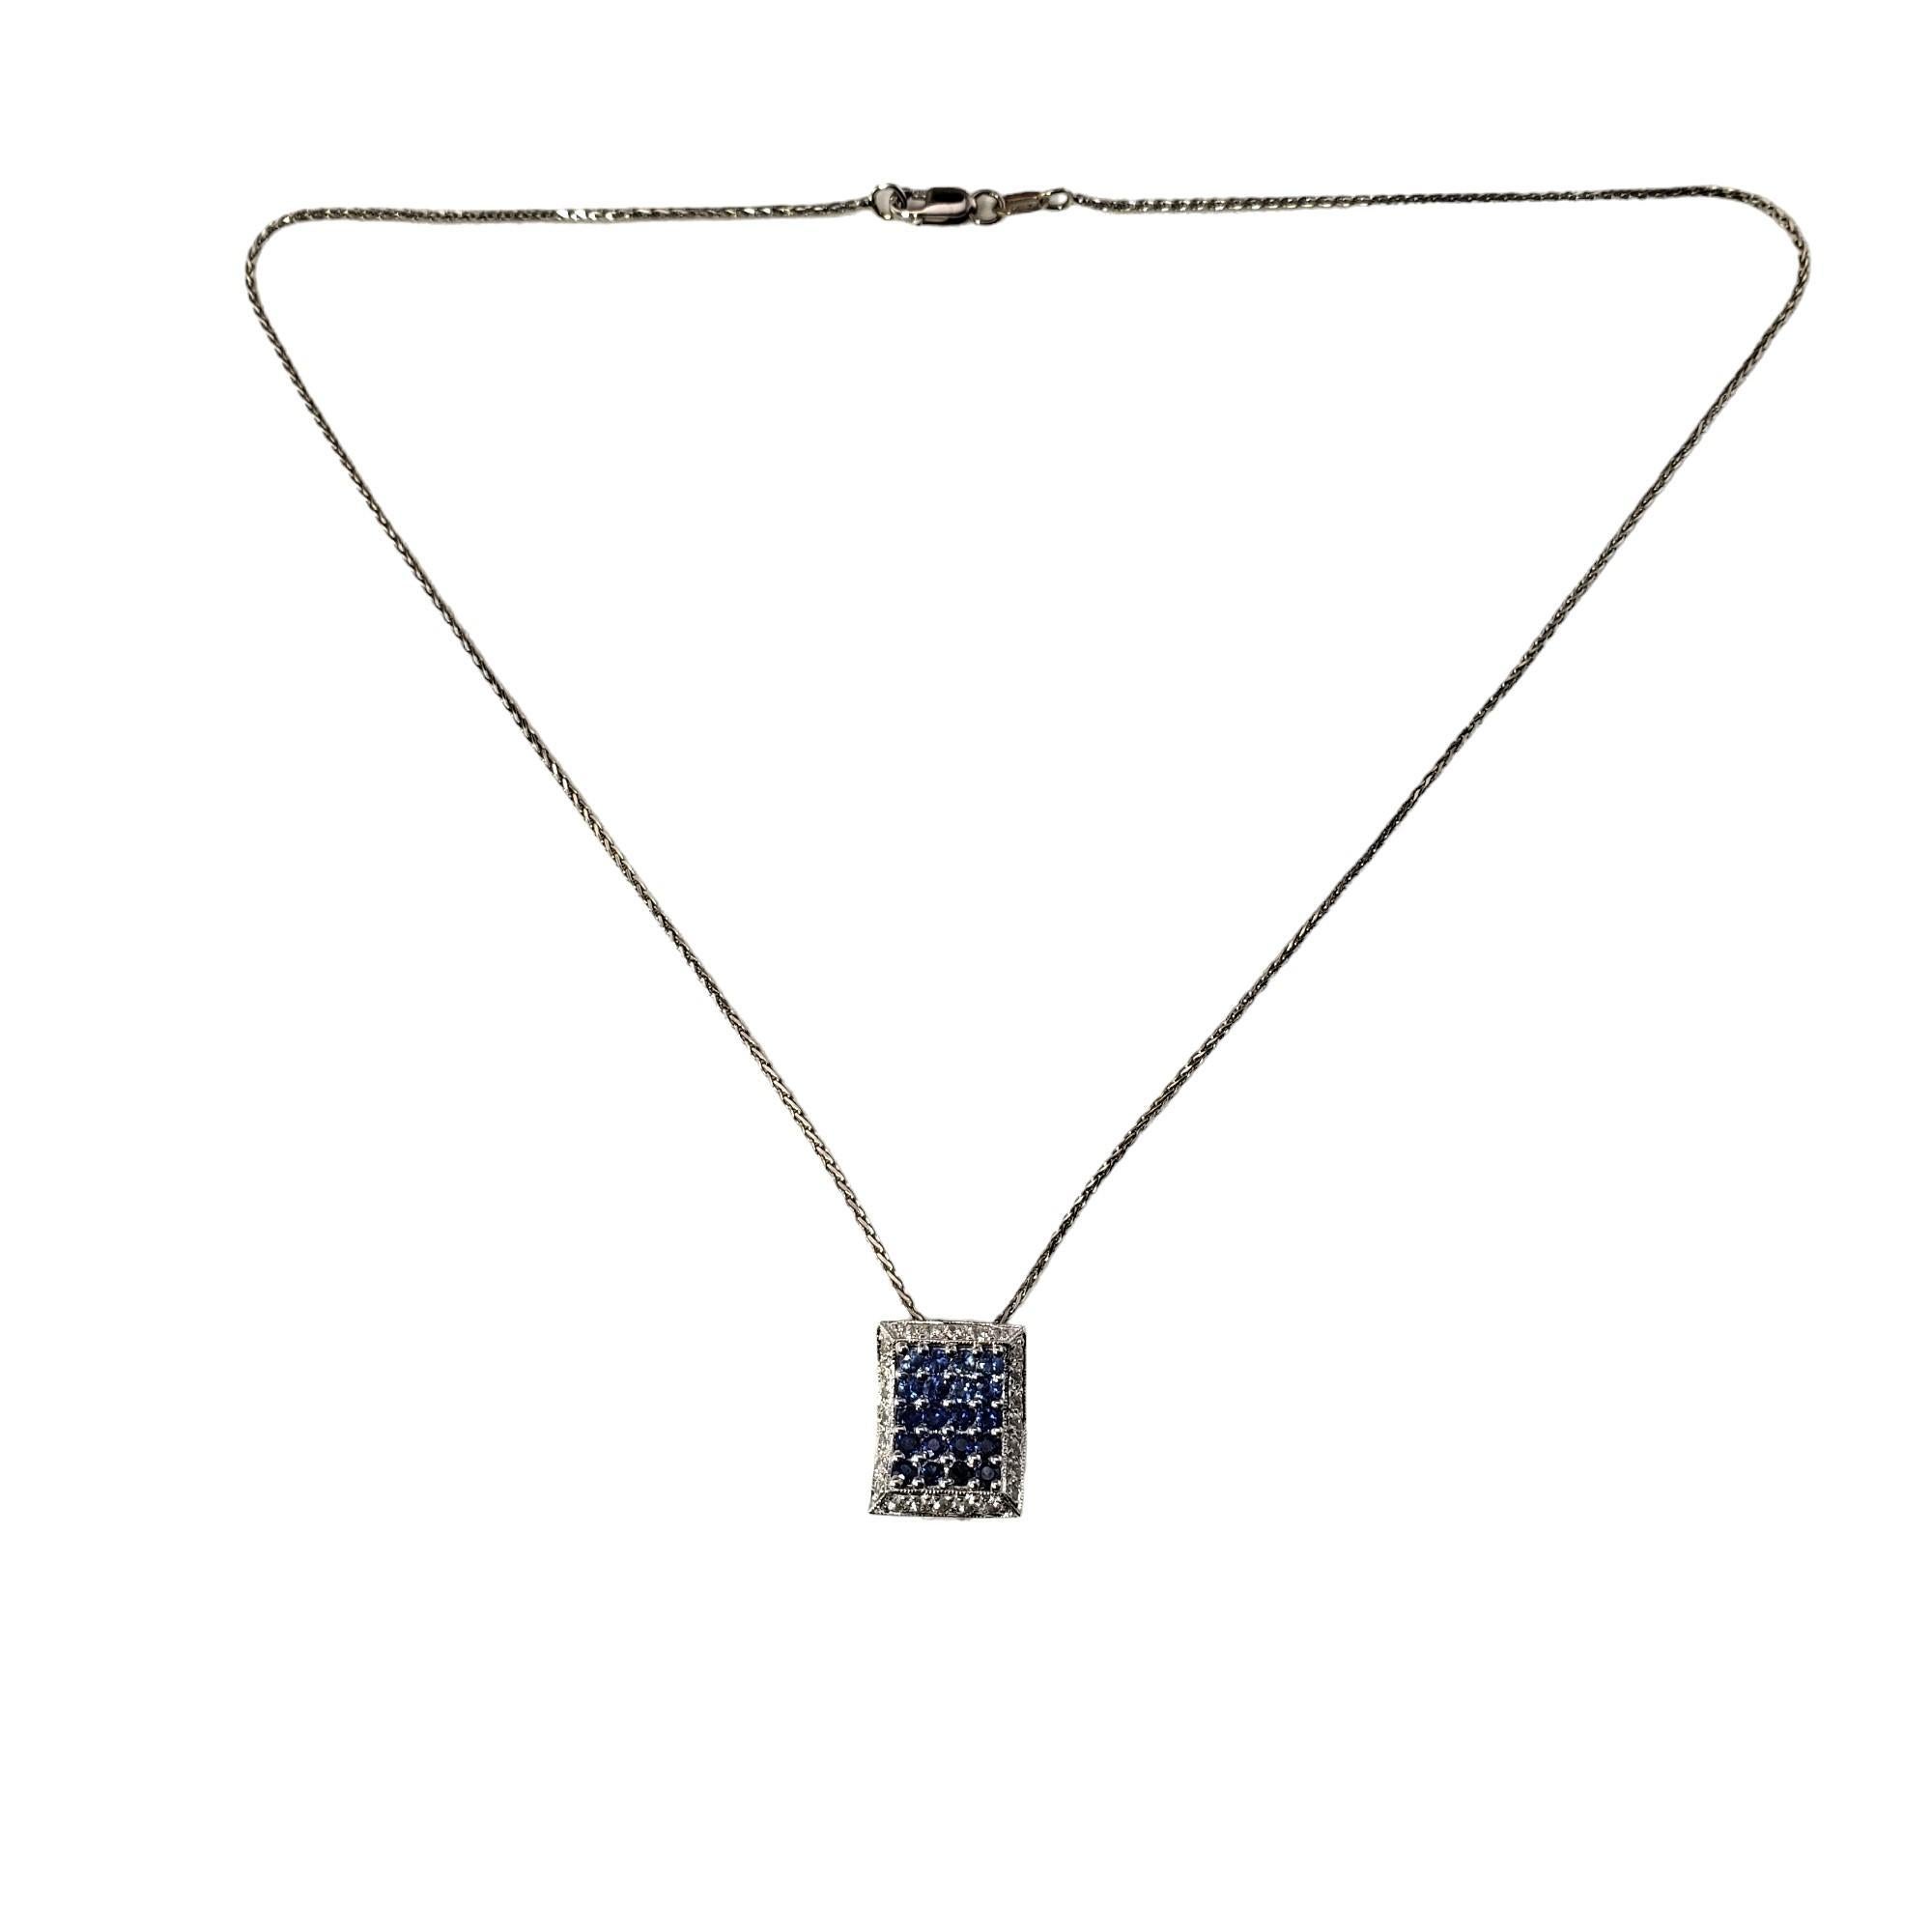 Vintage 14 Karat White Gold Blue and White Sapphire Pendant Necklace-

This elegant pendant necklace features 20 round blue sapphires and 24 round white sapphires set in beautifully detailed 14K white gold.

Total blue sapphire weight:  .80